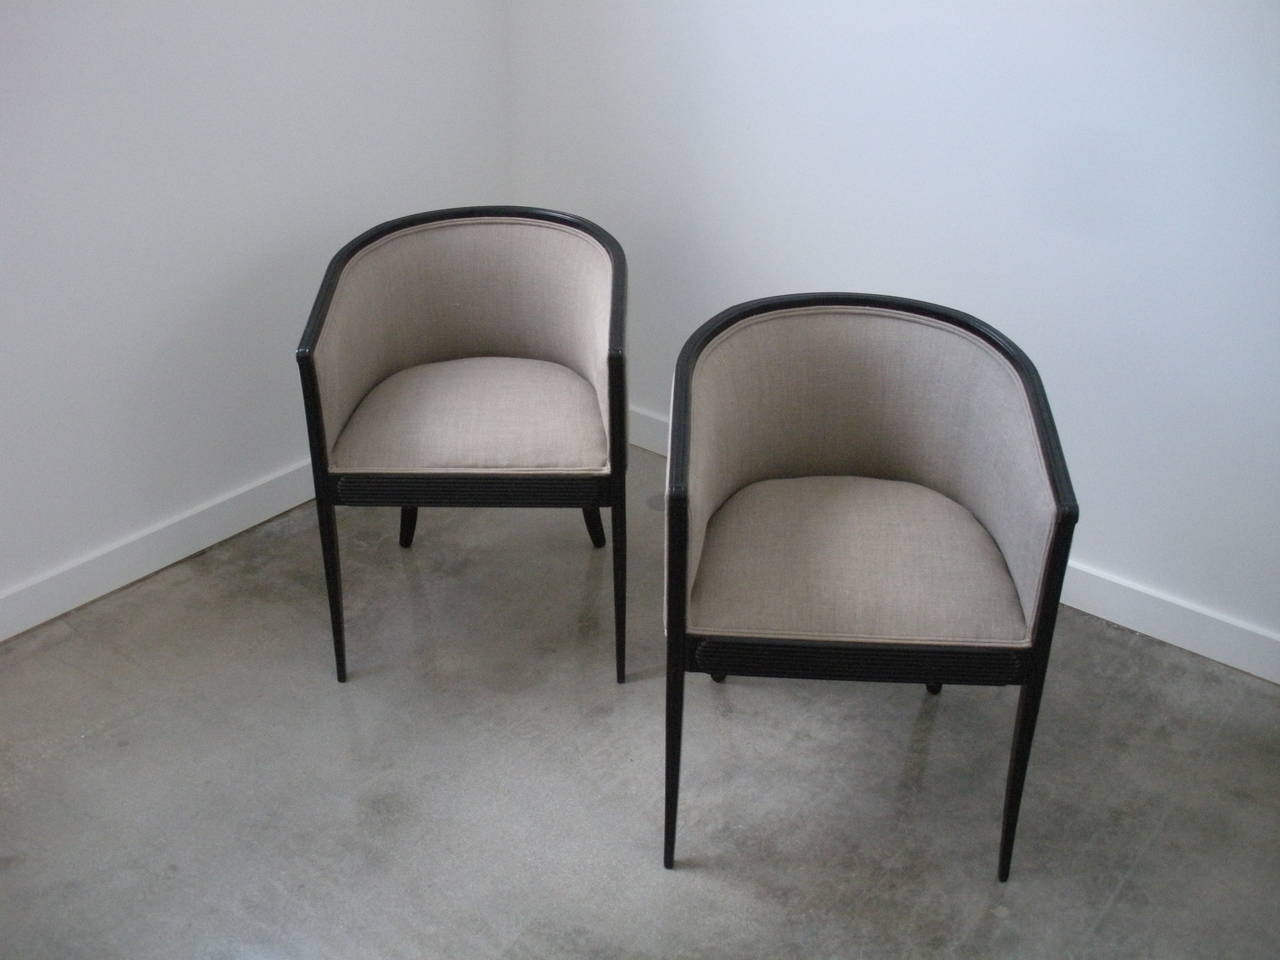 Pair Of French Art Deco Tub Chairs At 1stdibs